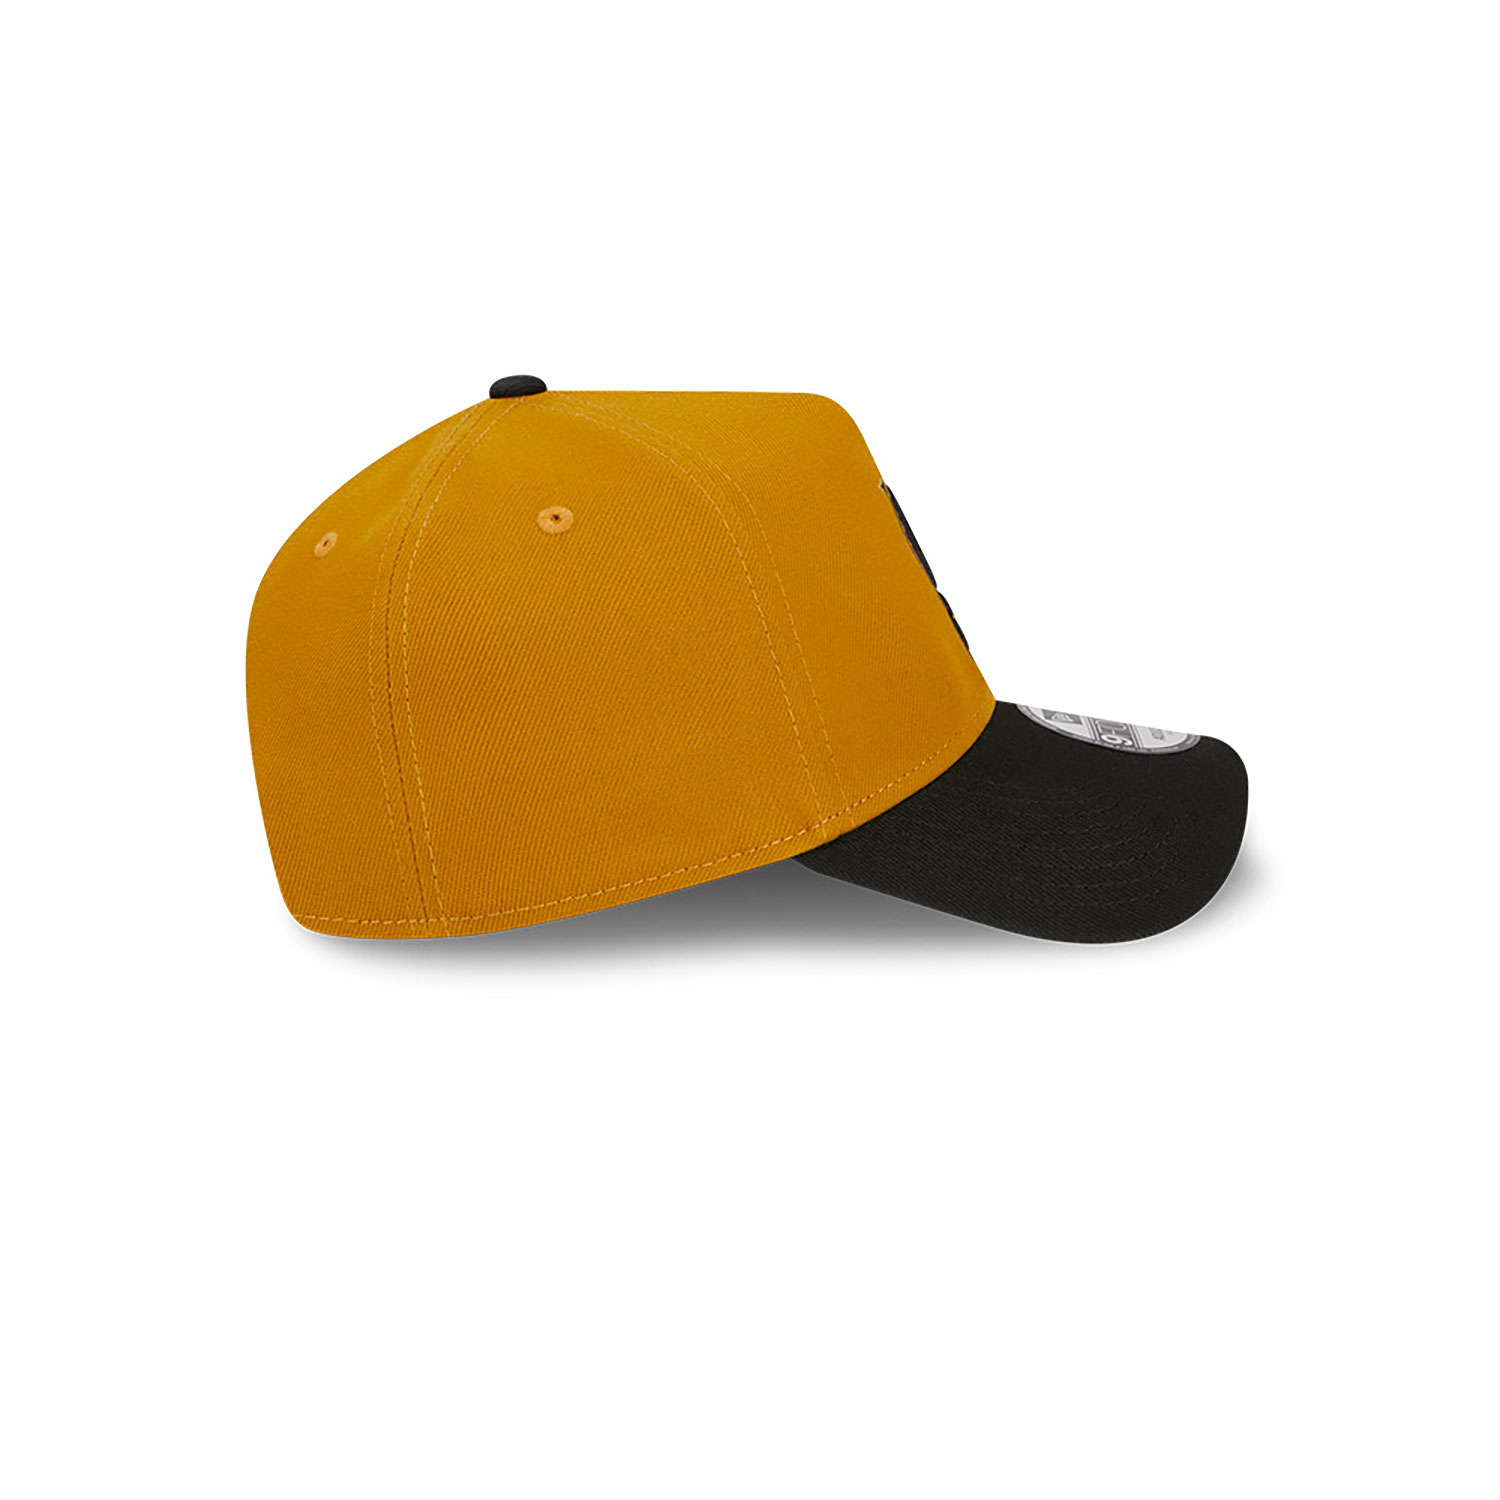 Miami Marlins Rustic Fall Gold A-Frame 9FORTY Adjustable Cap